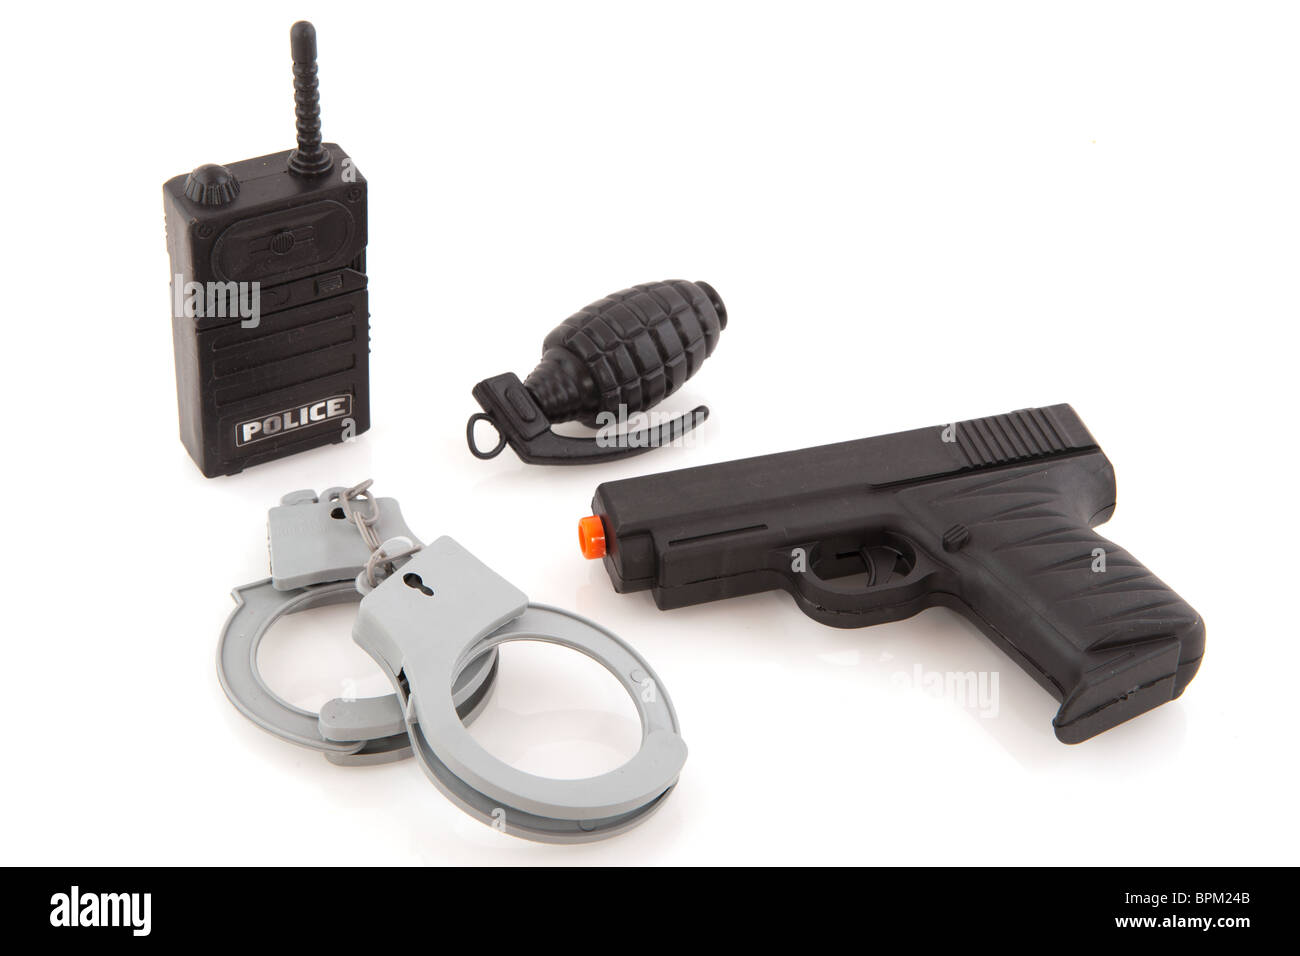 Police equipment with walkie talkie hand cuffs gun and trench bomb Stock Photo